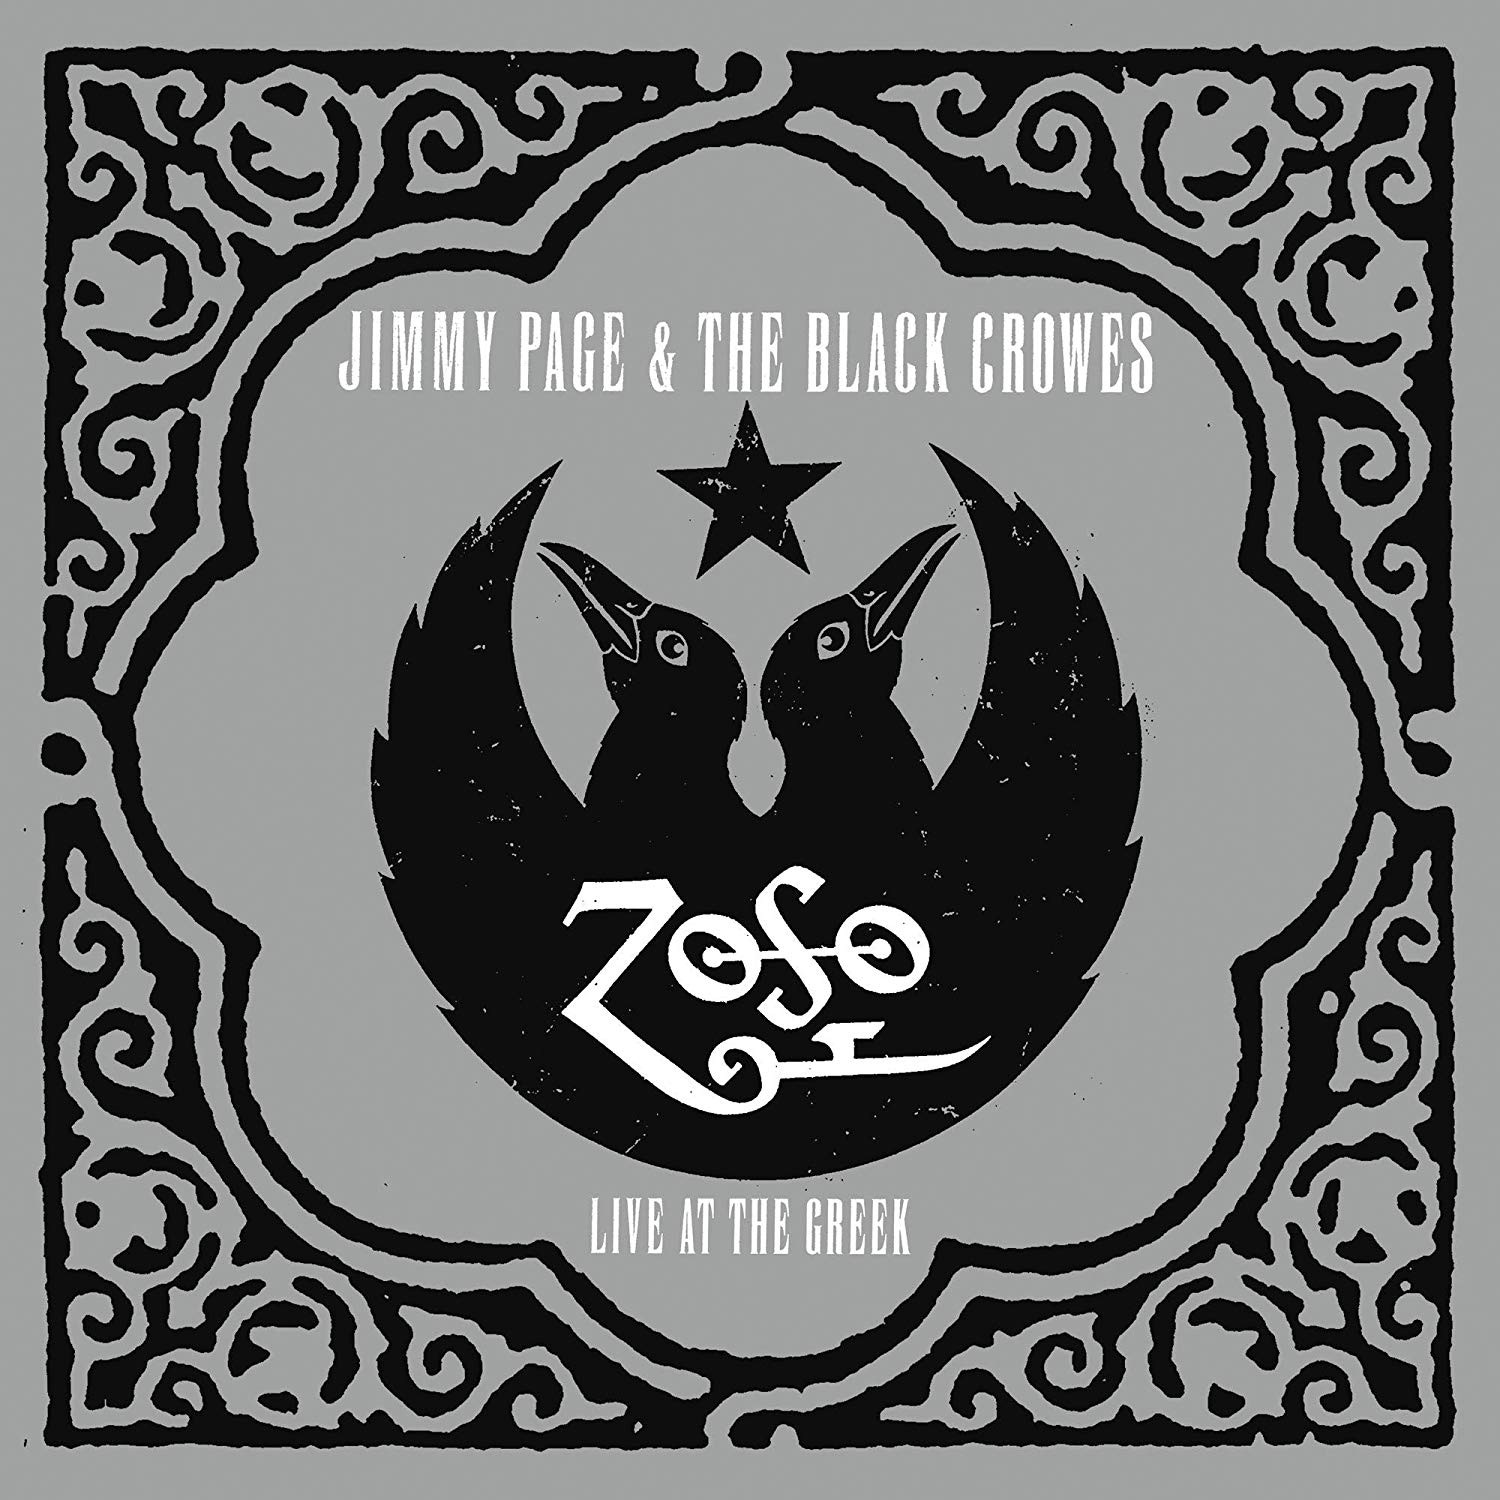 Jimmy Page & The Black Crowes - Live At The Greek (20th Anniversary) 3XLP